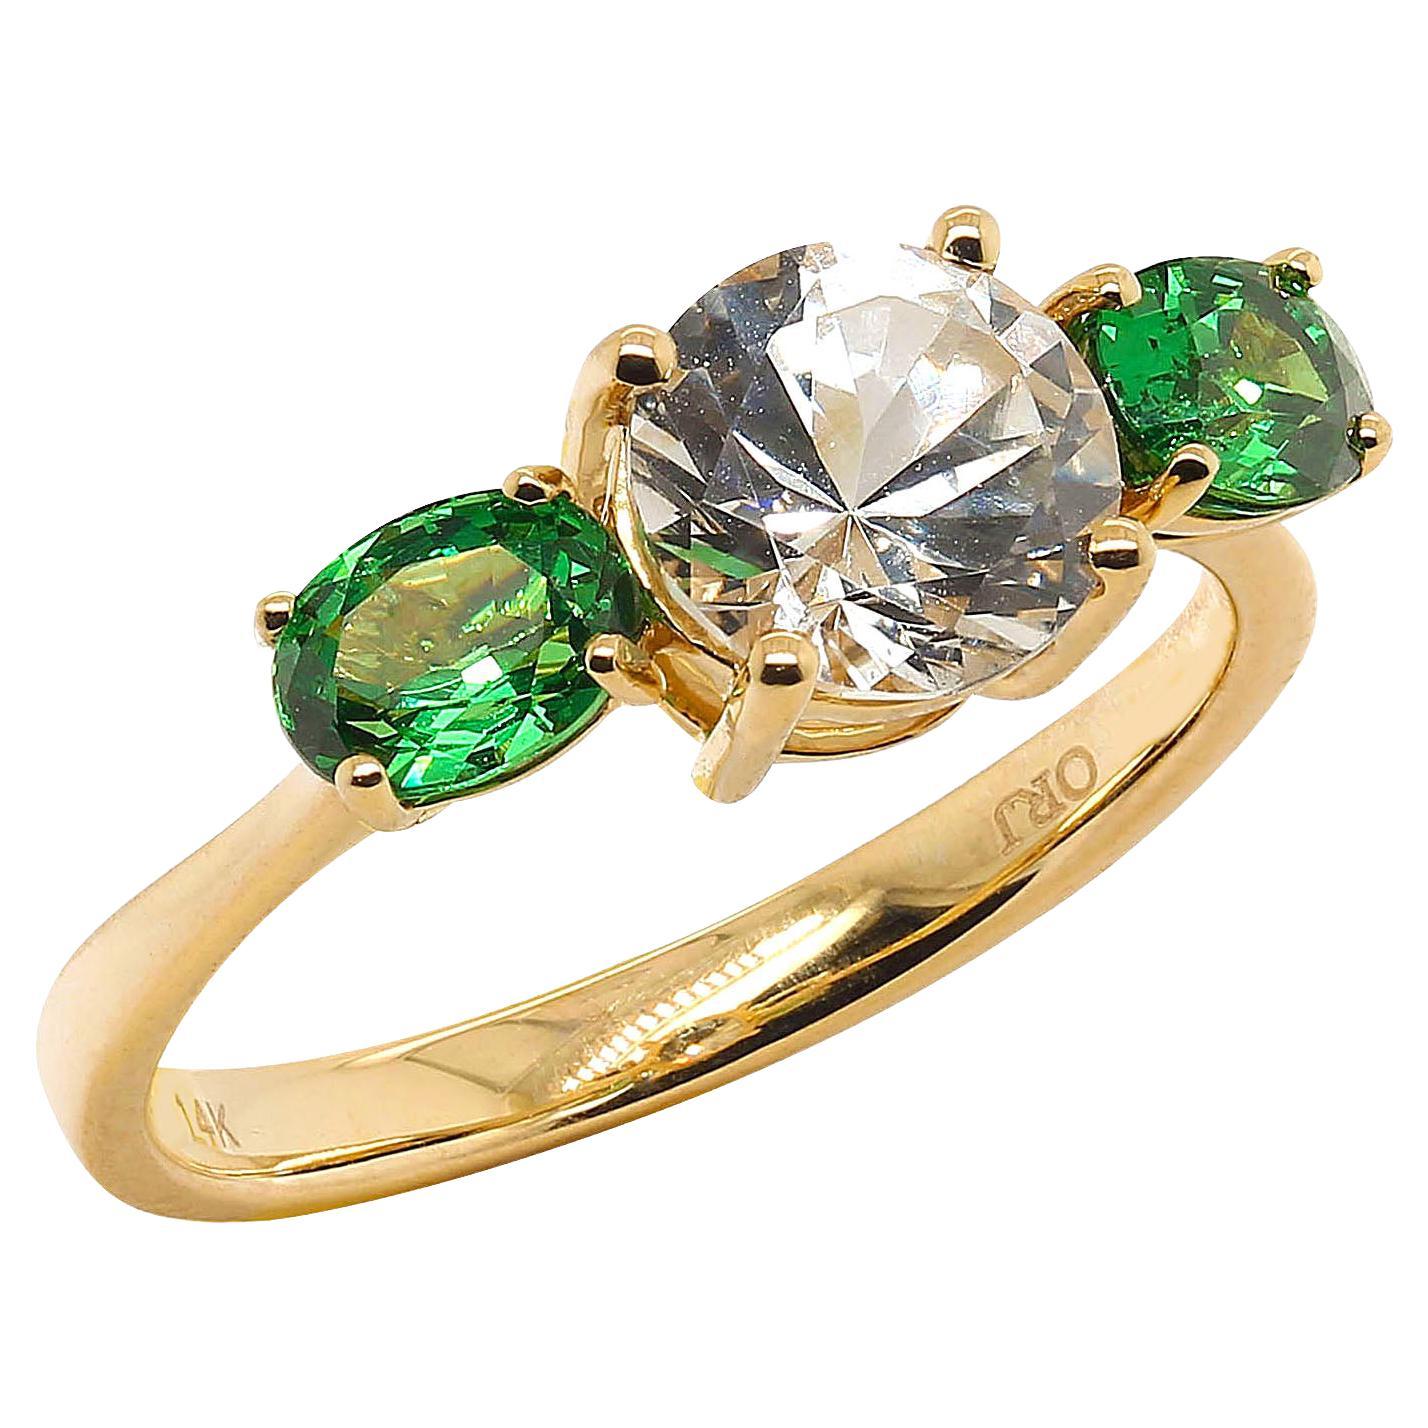 Custom made, romantic 14K Yellow Gold Ring featuring a sparkling, round White Sapphire flanked by two brilliant oval, green Tsavorites. This traditional ring is such a romantic look. The sparkling White Sapphire is 1.65 carats and the two brilliant